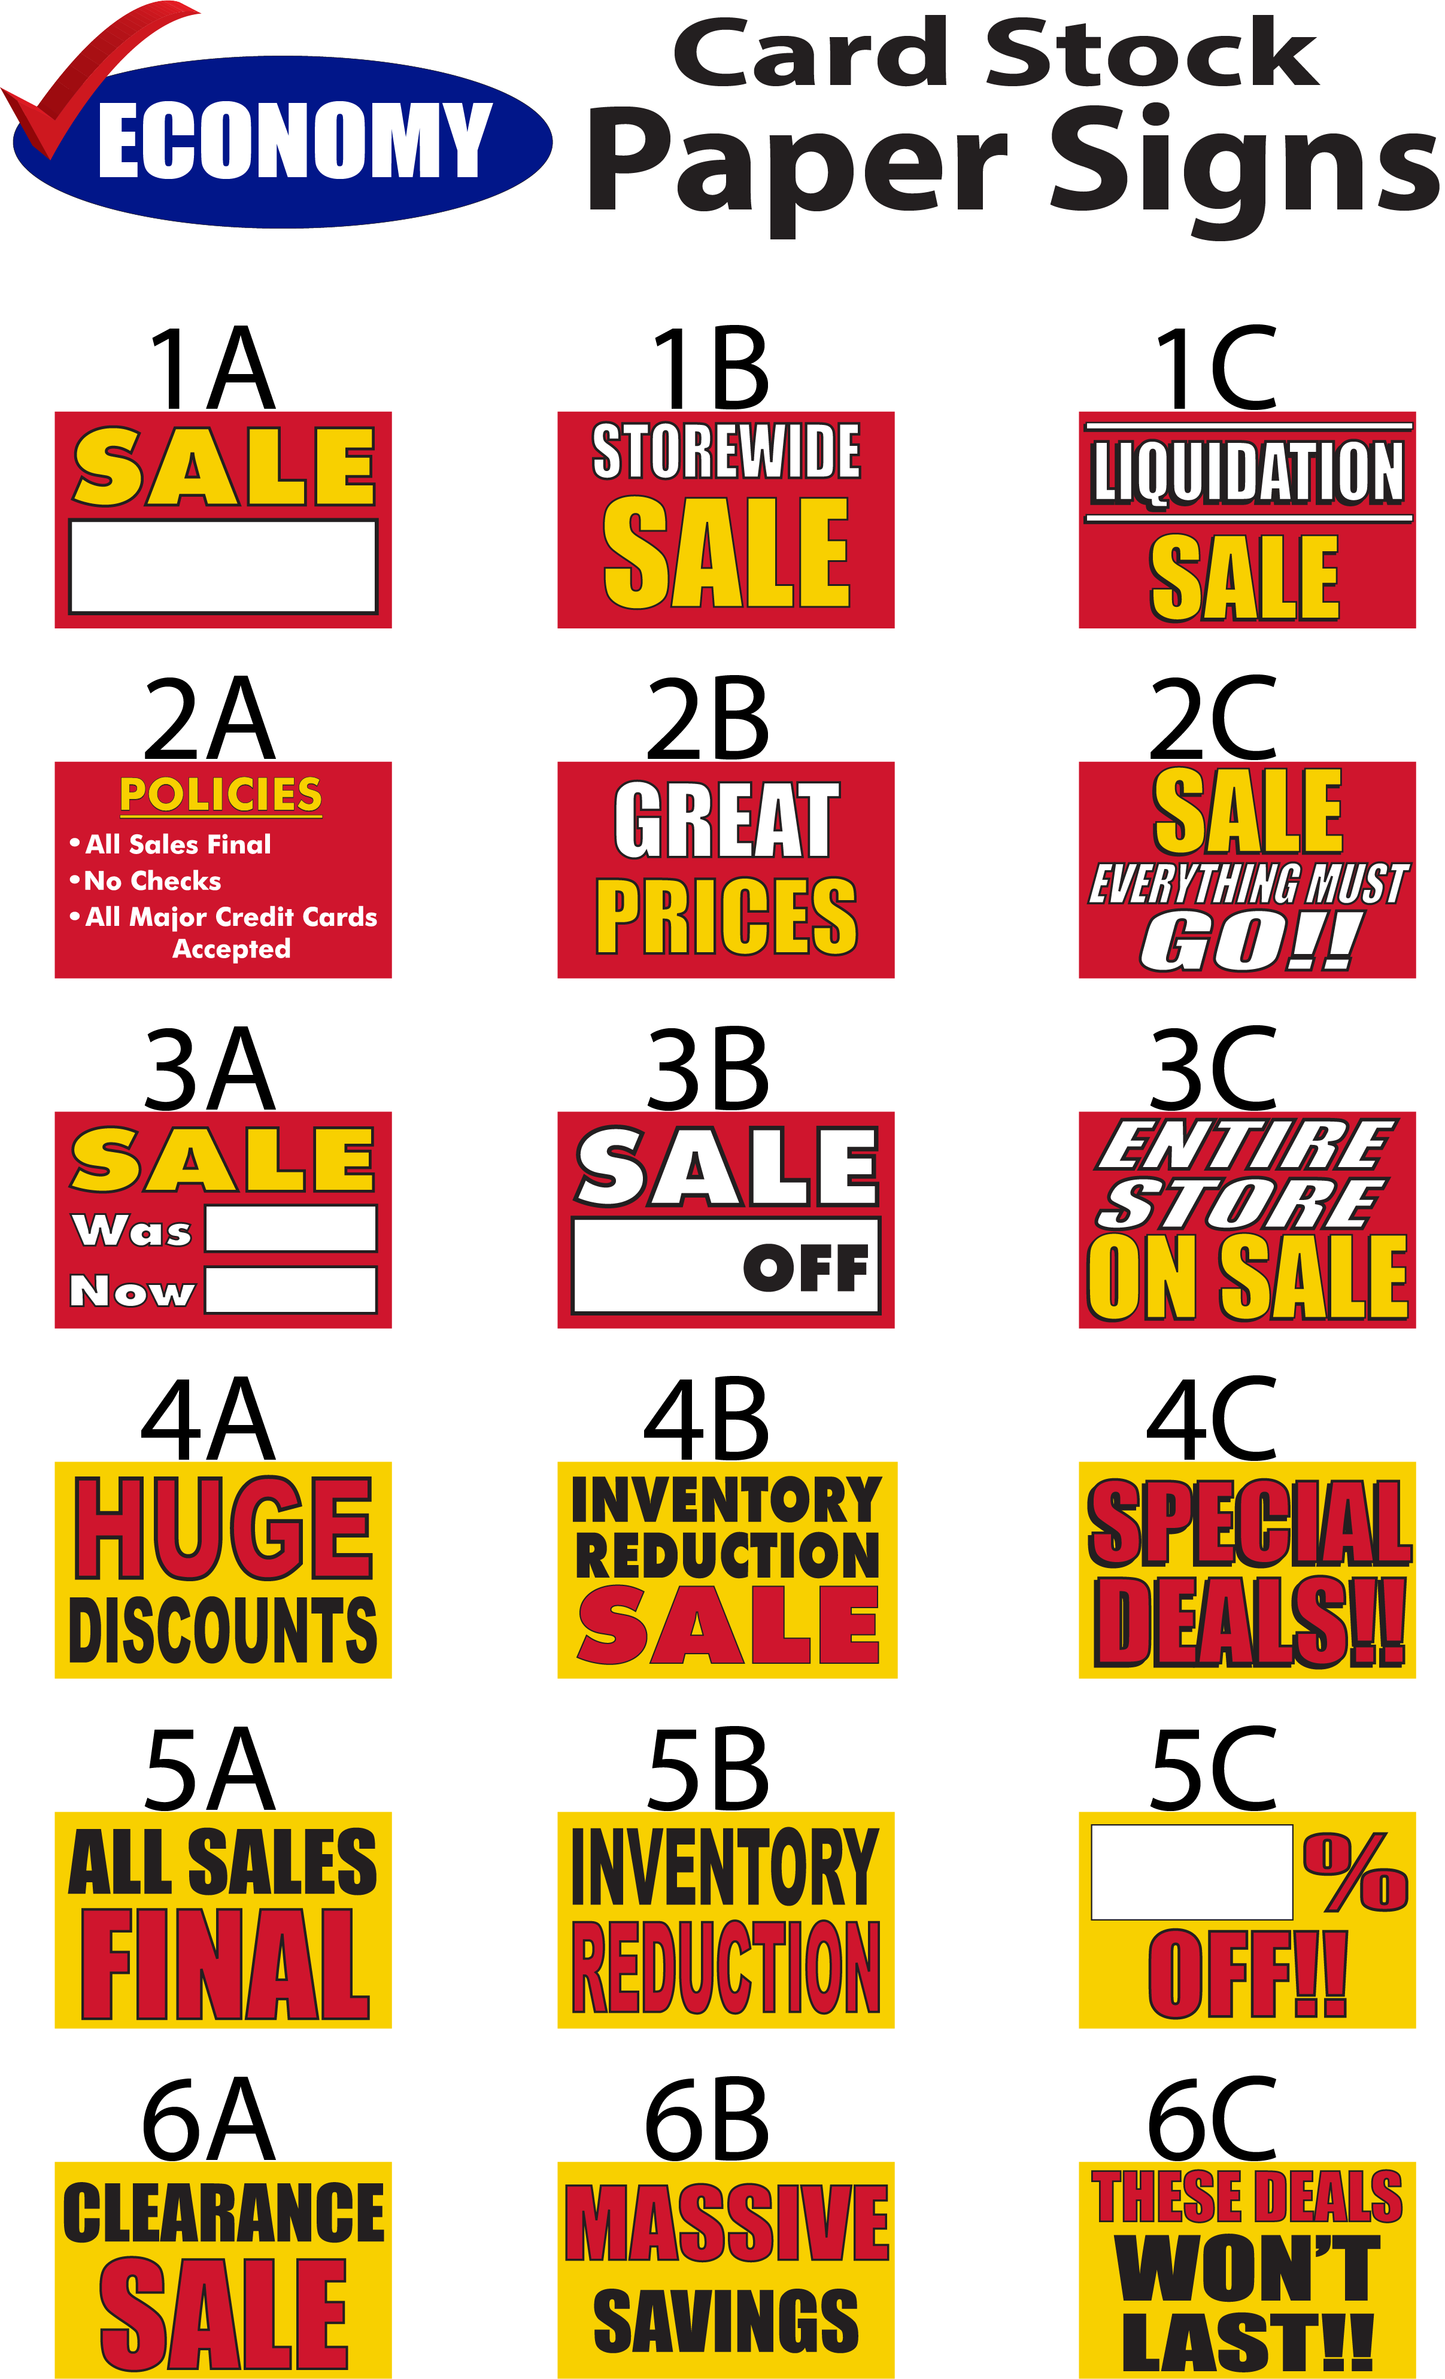 Store-Wide Sale Signs - Economy Paper Card Stock - $28 min. order